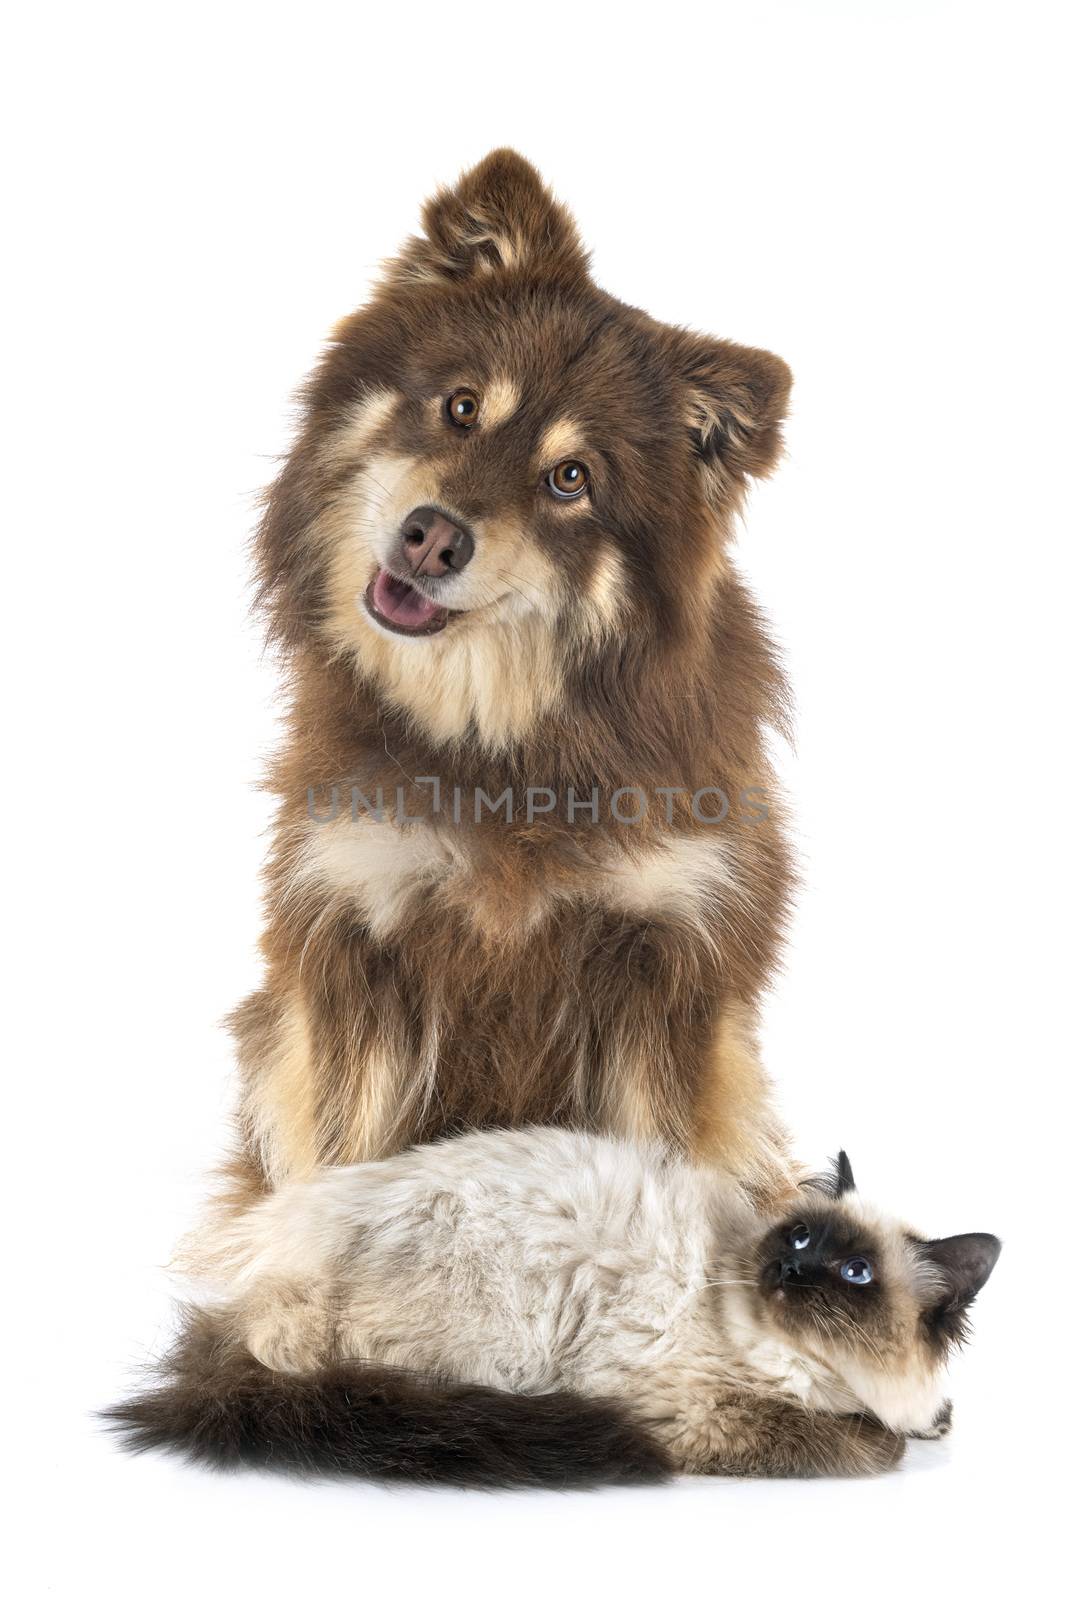 birman cat and lapikoira in front of white background